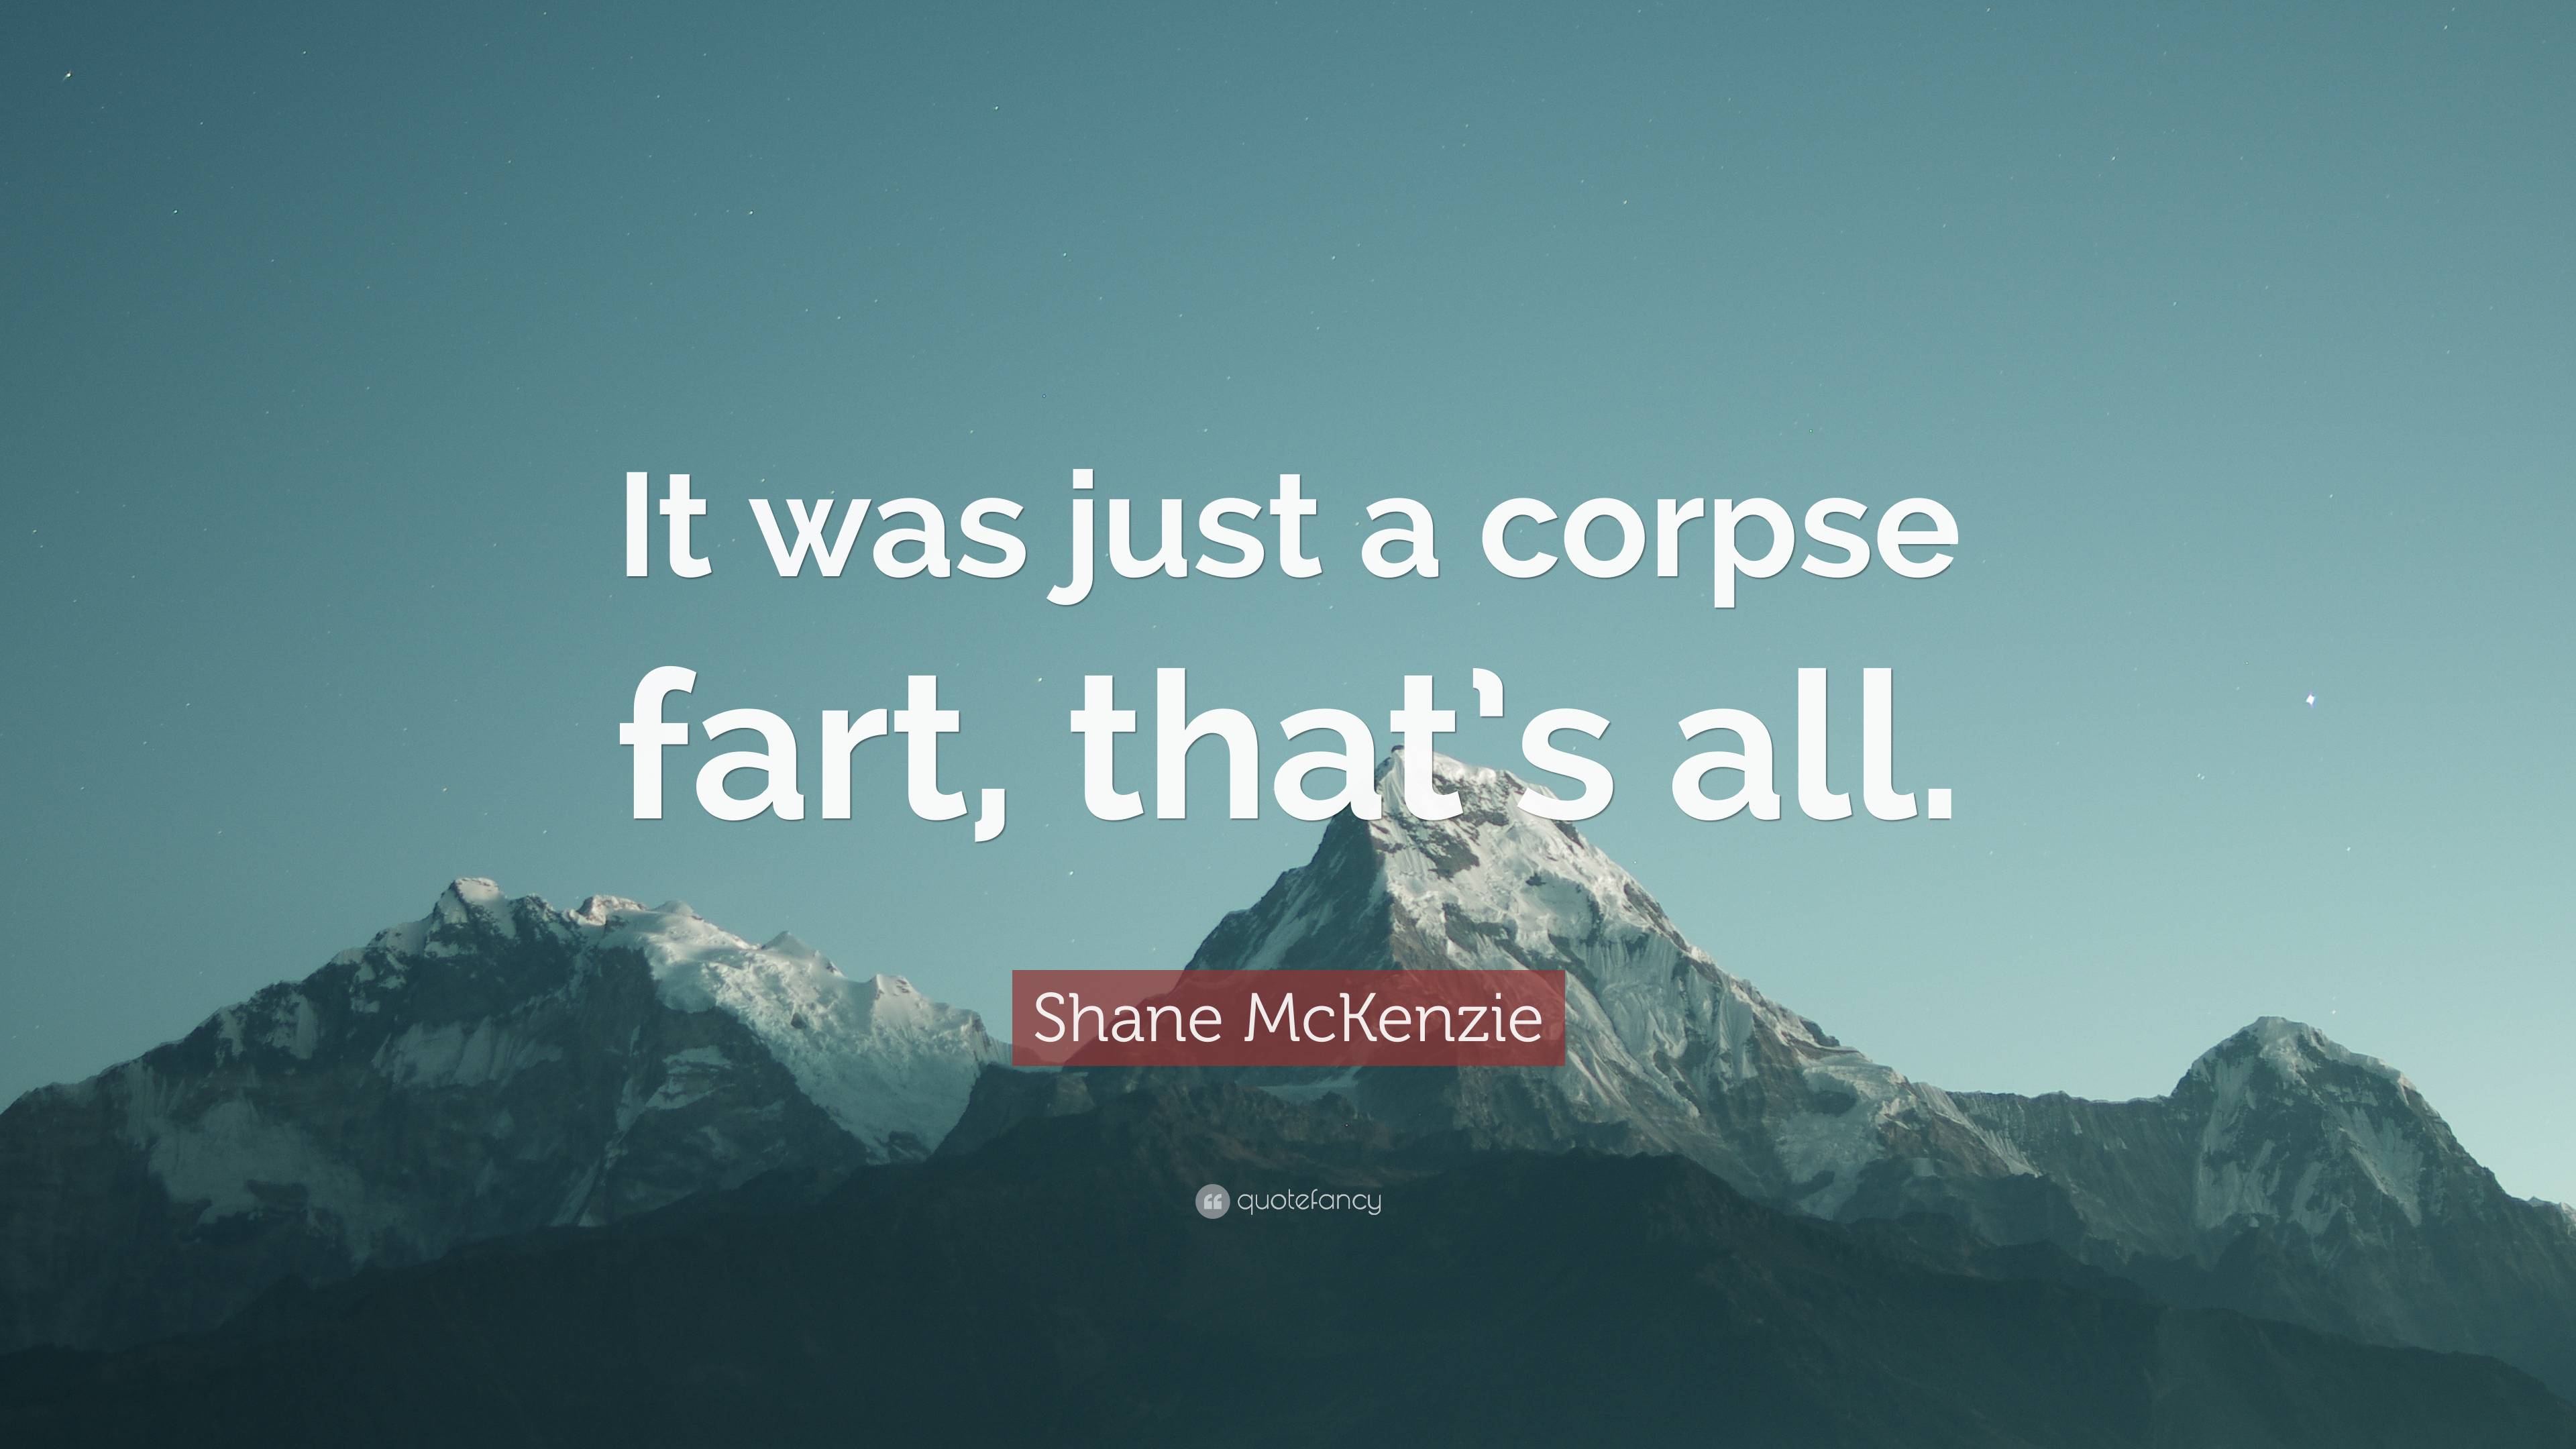 Shane McKenzie Quote: “It was just a corpse fart, that's all.”